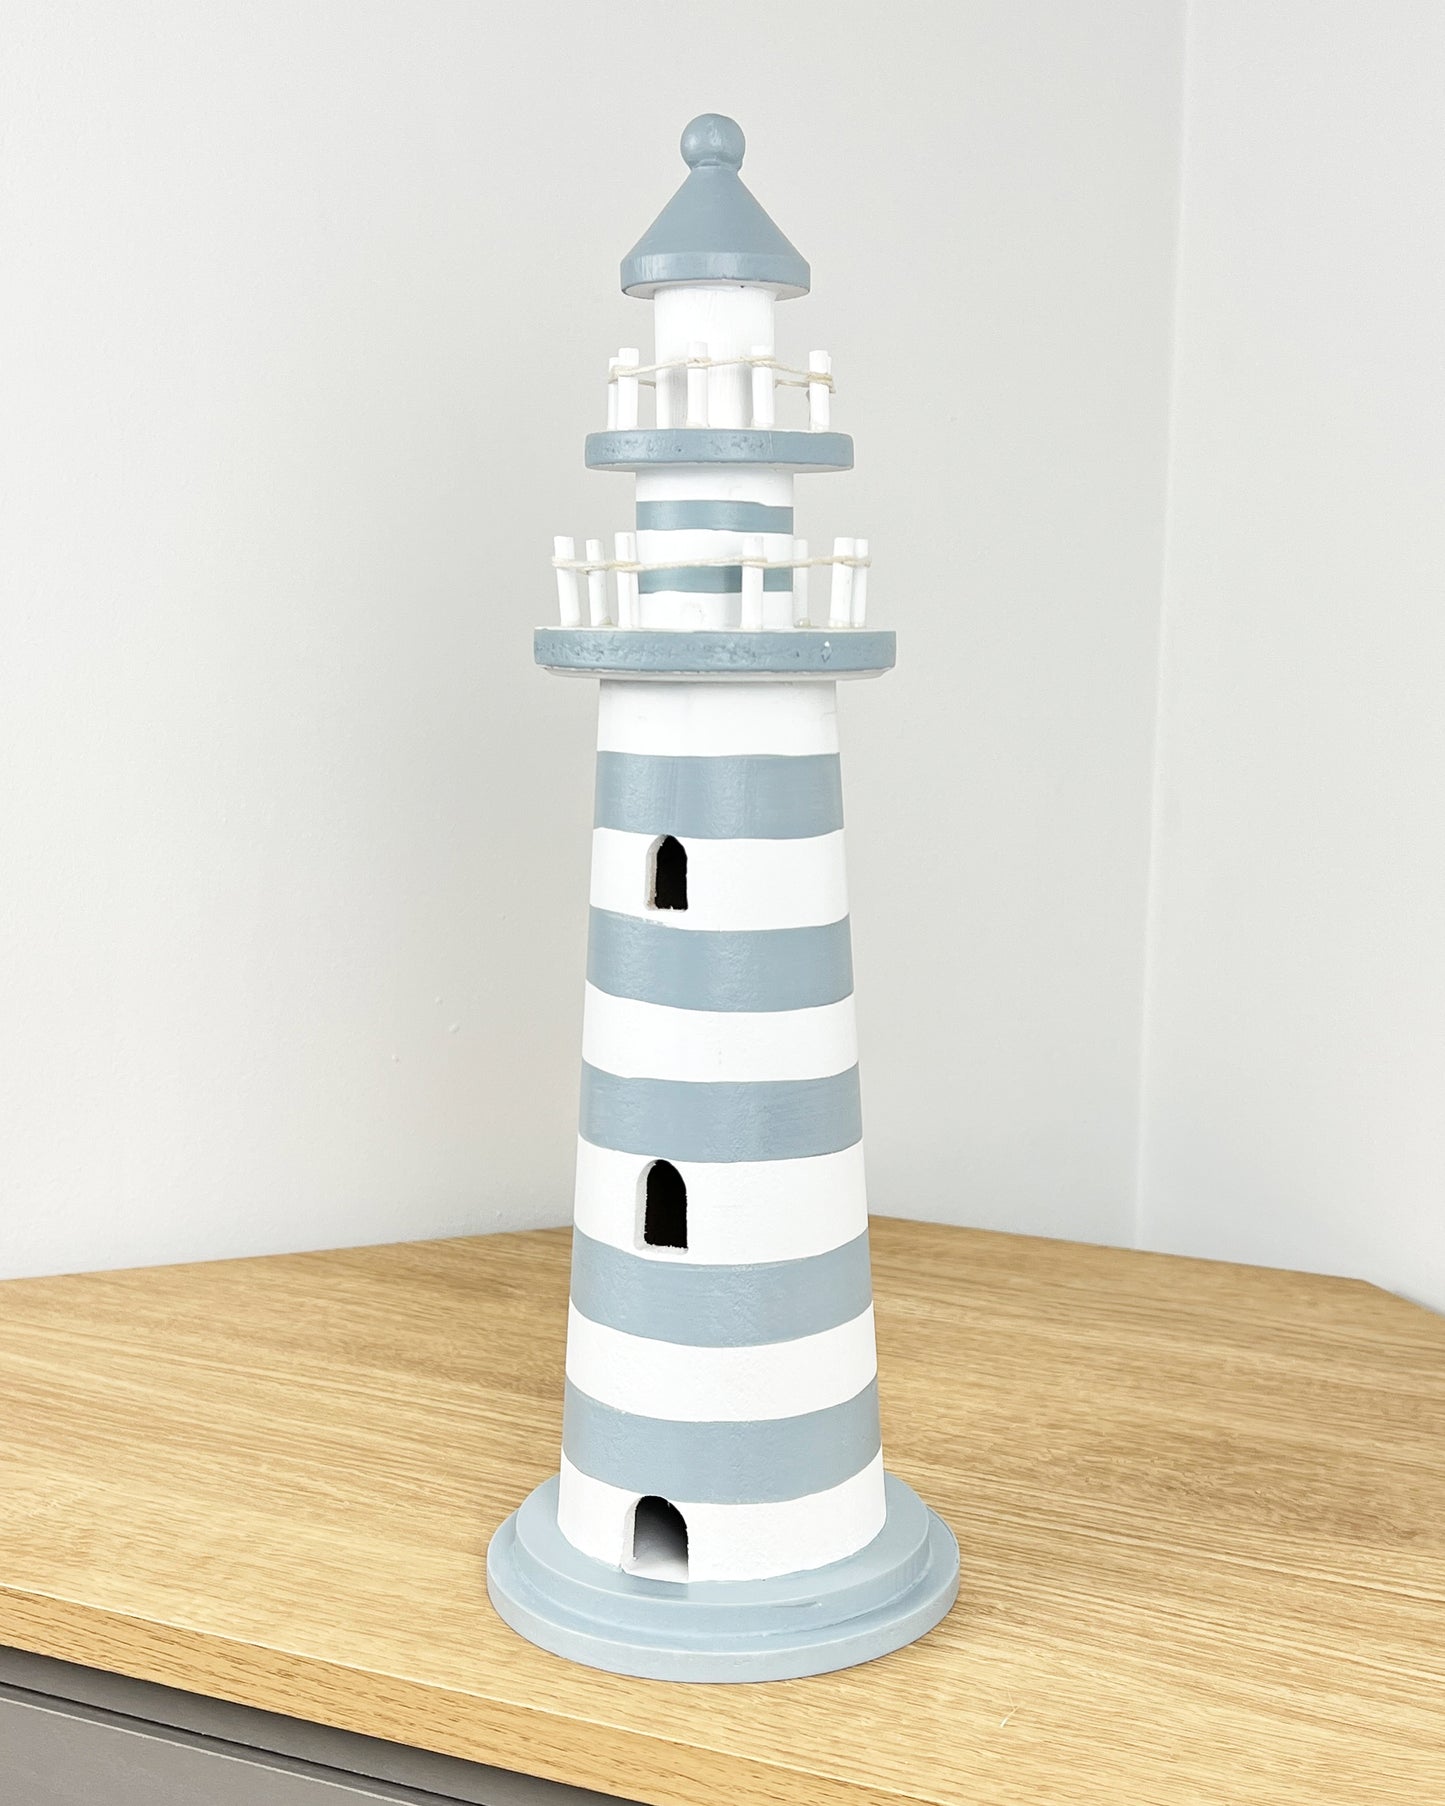 15" Wooden Lighthouse Ornament